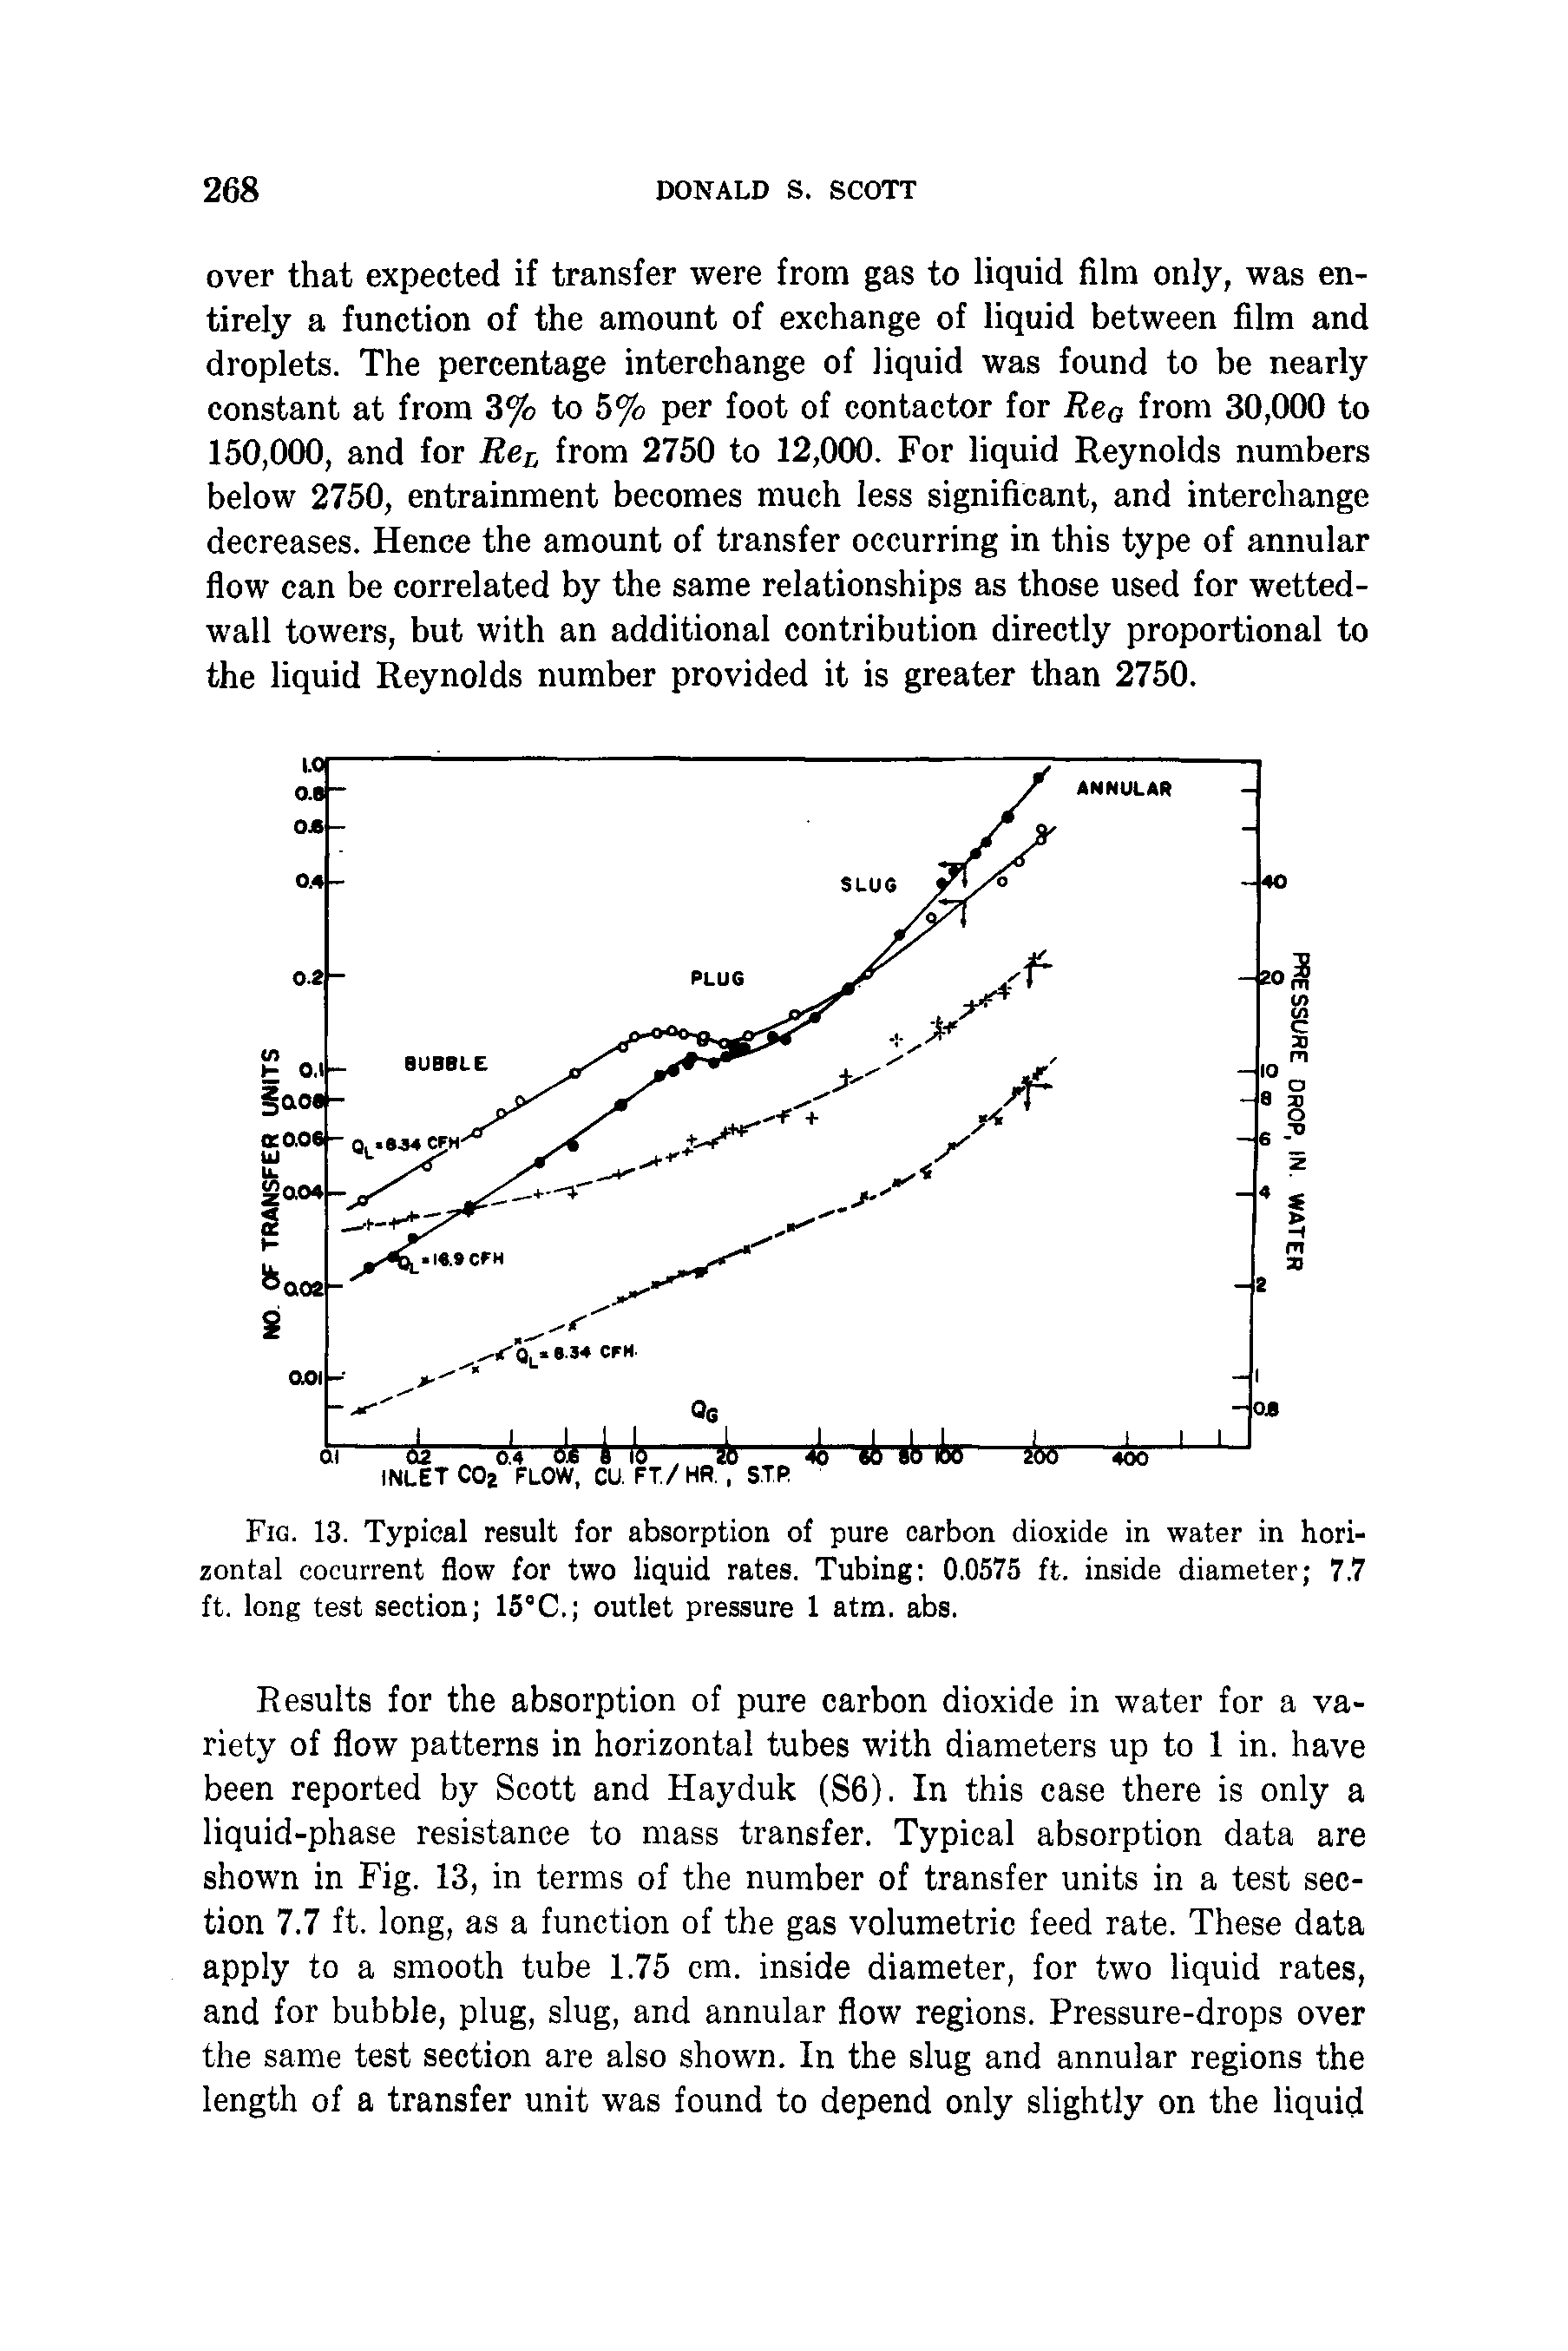 Fig. 13. Typical result for absorption of pure carbon dioxide in water in horizontal cocurrent flow for two liquid rates. Tubing 0.0575 ft. inside diameter 7.7 ft. long test section 15°C. outlet pressure 1 atm. abs.